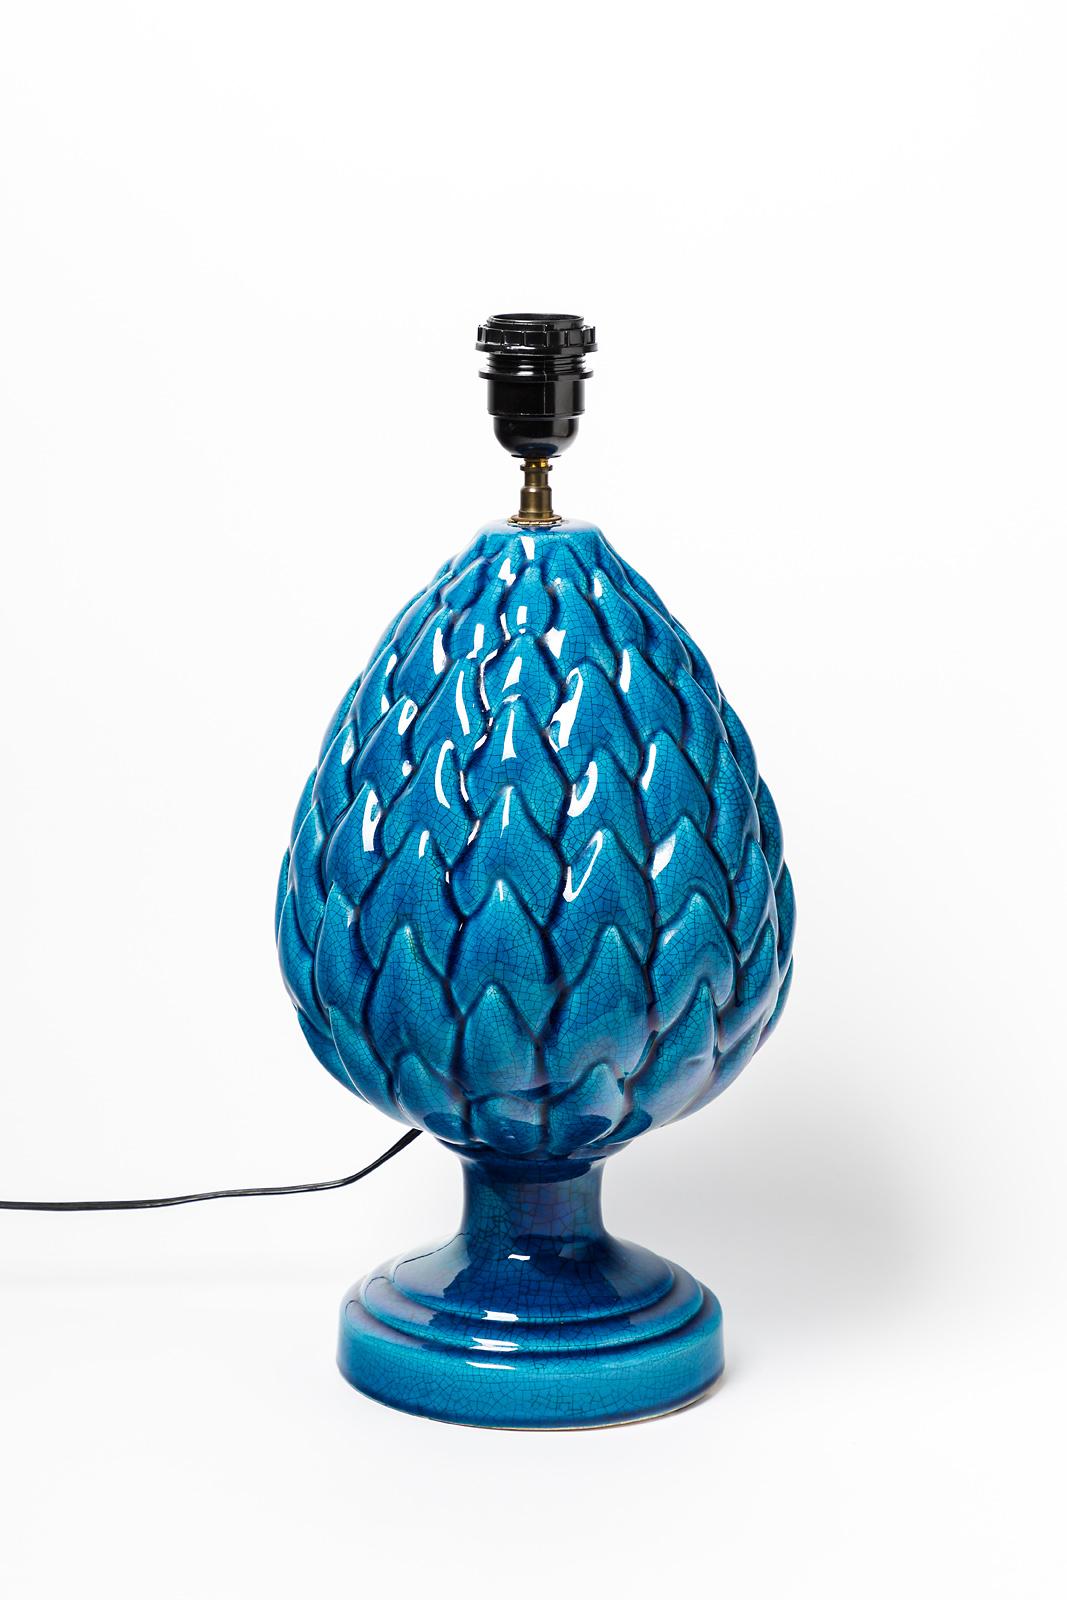 Attributed to Pol Chambost

Original blue ceramic table lamp

1950 french design

Original perfect condition

Electrical system is ok

Blue ceramic glaze color

Measures: Ceramic height 37 cm
Height with electrical system 45 cm
Large